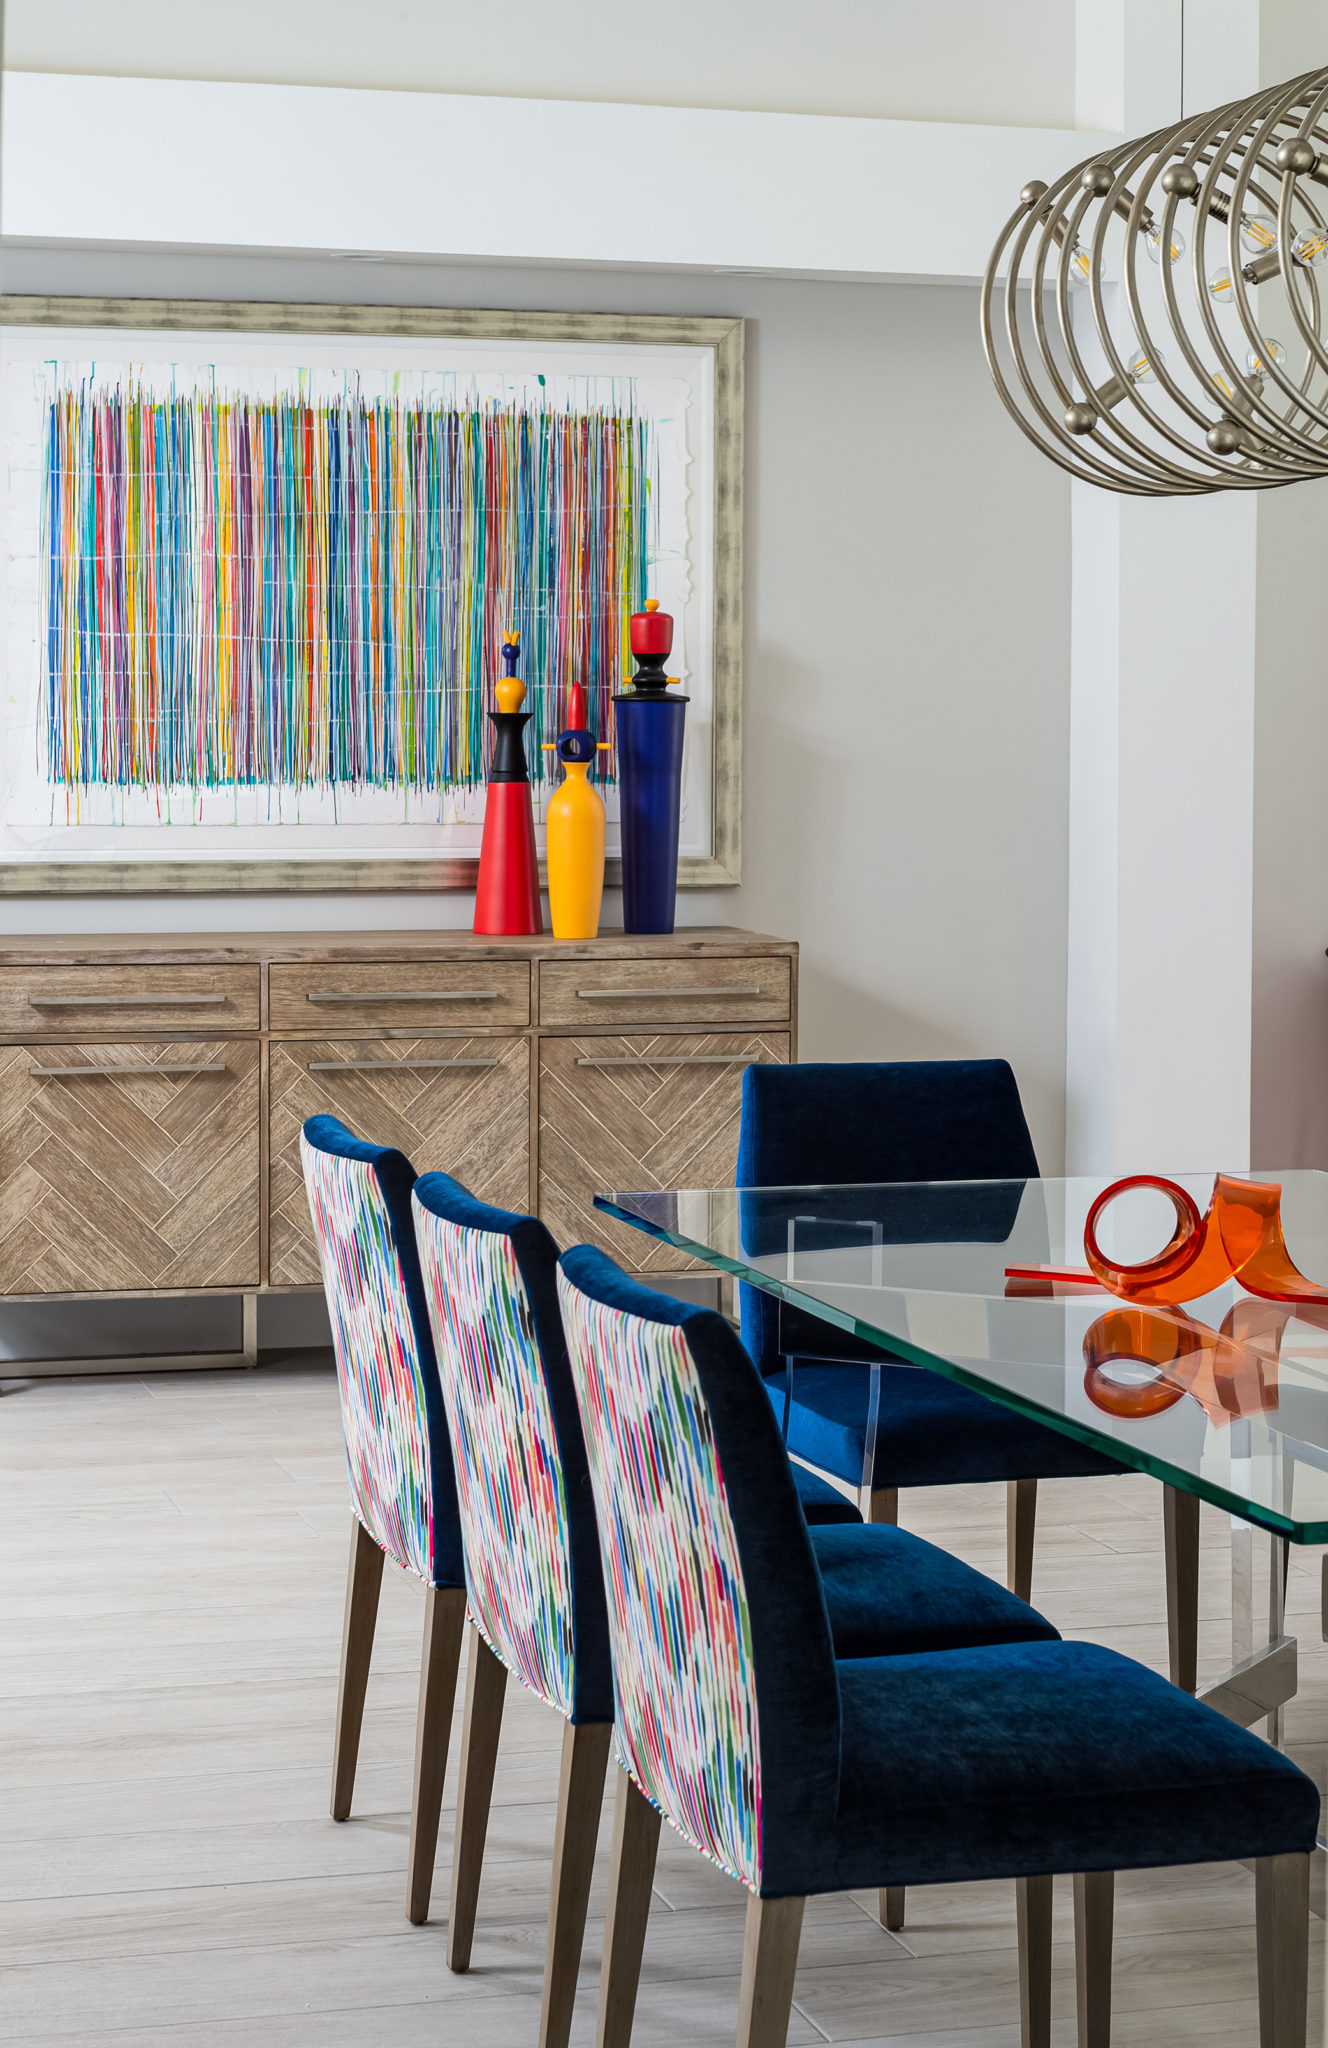 Custom upholstery in this bright dining room shows why you should have custom upholstery in your home.